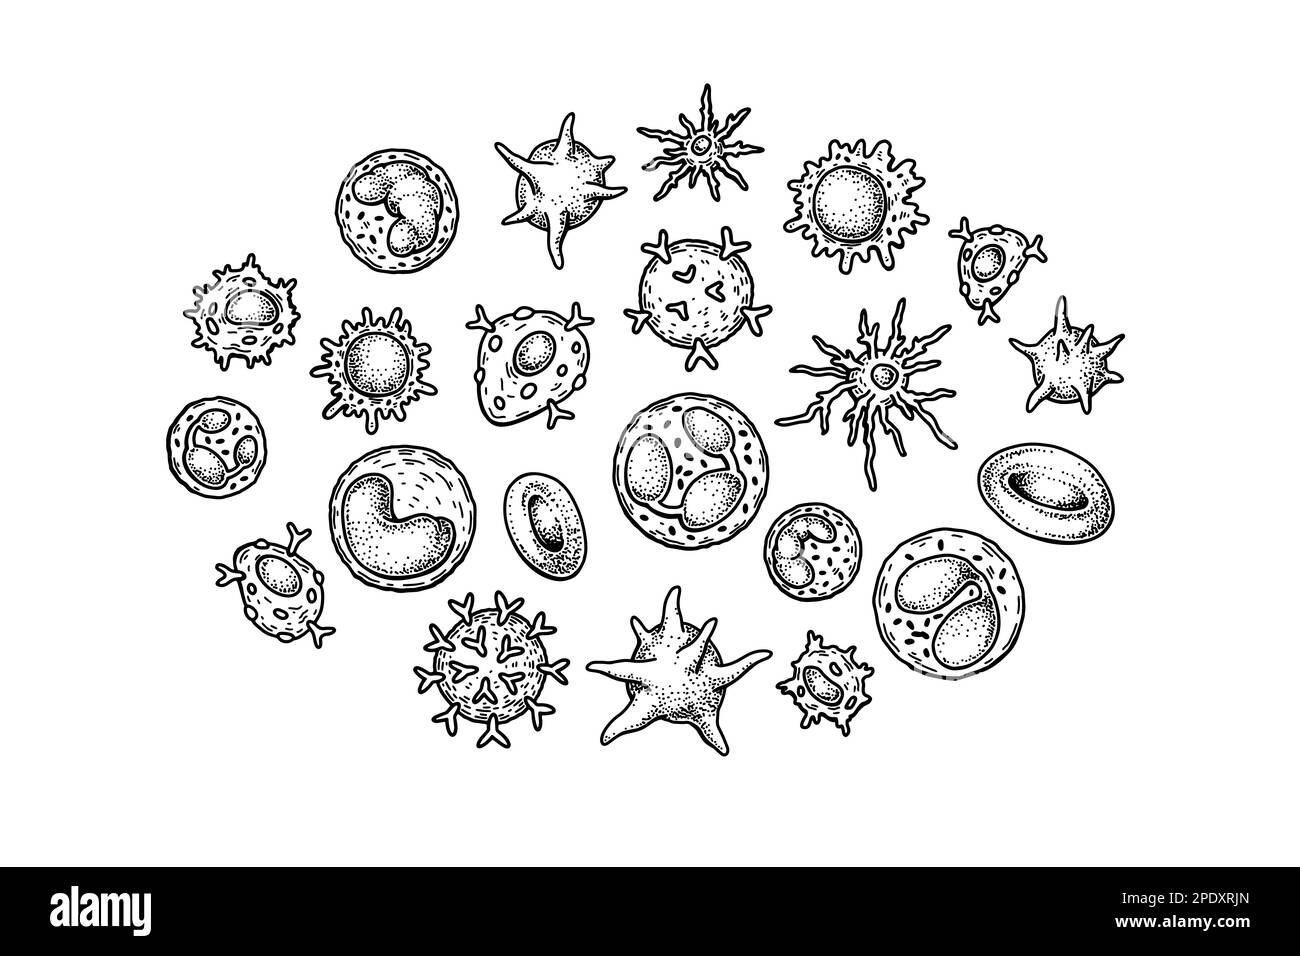 Blood cells isolated on white background. Scientific microbiology vector illustration in sketch style Stock Vector